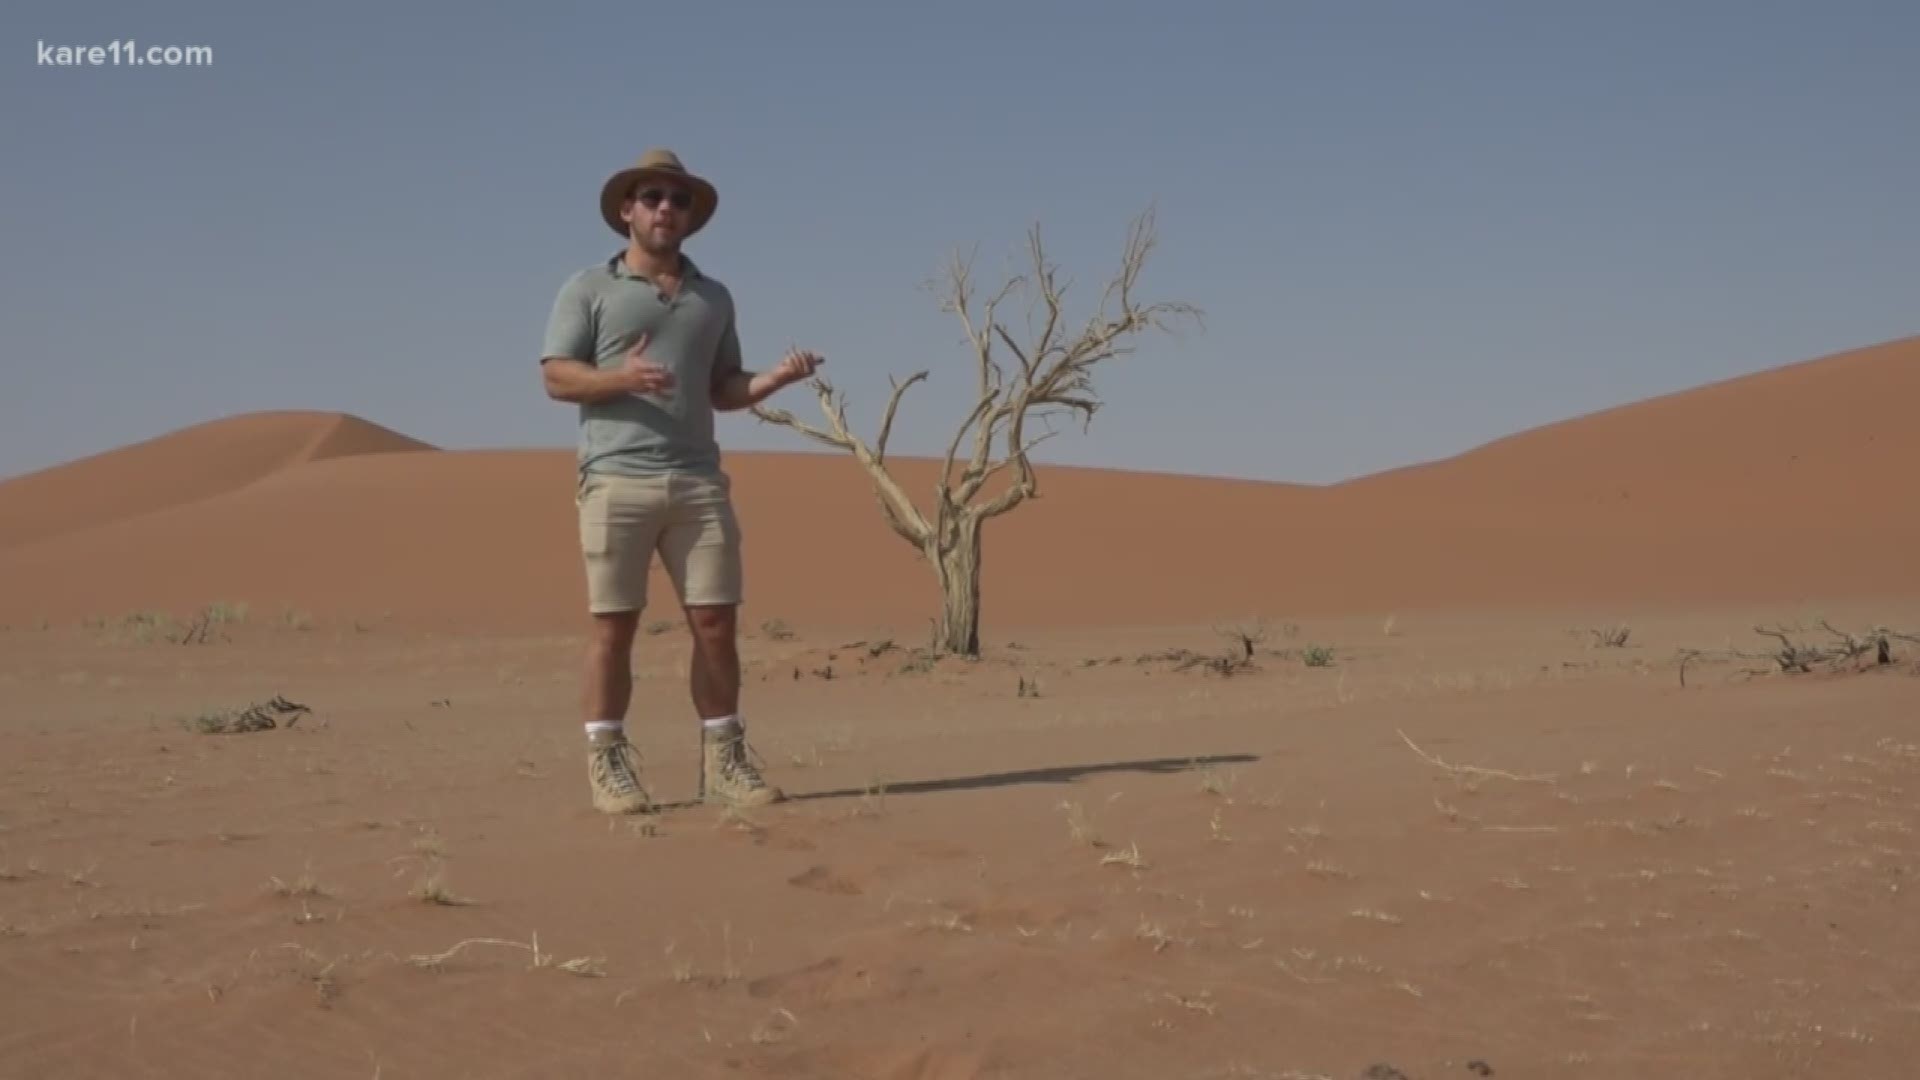 Watch some highlights of Sven Sundgaard's time in Namibia.